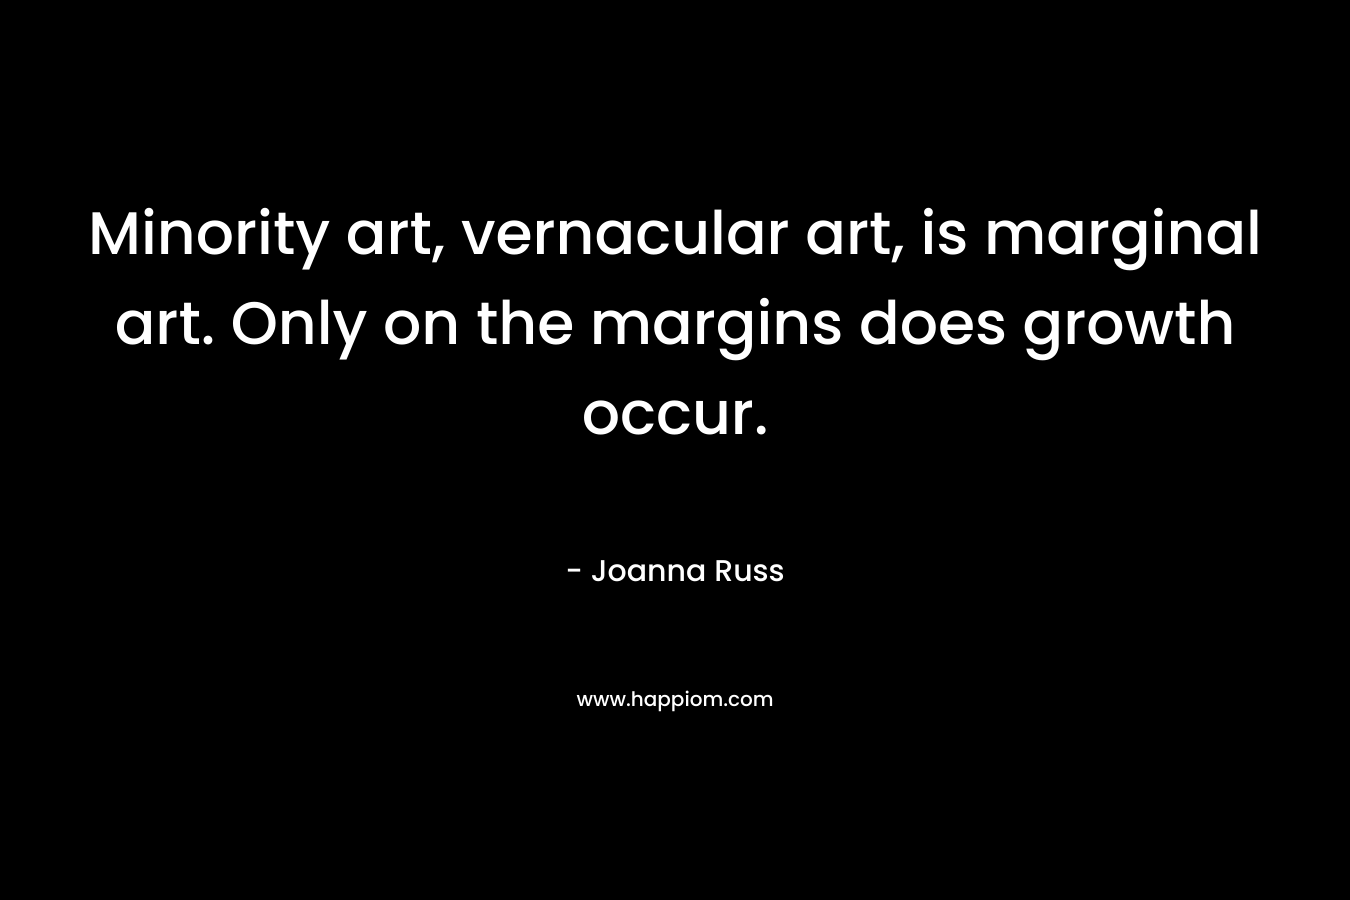 Minority art, vernacular art, is marginal art. Only on the margins does growth occur.